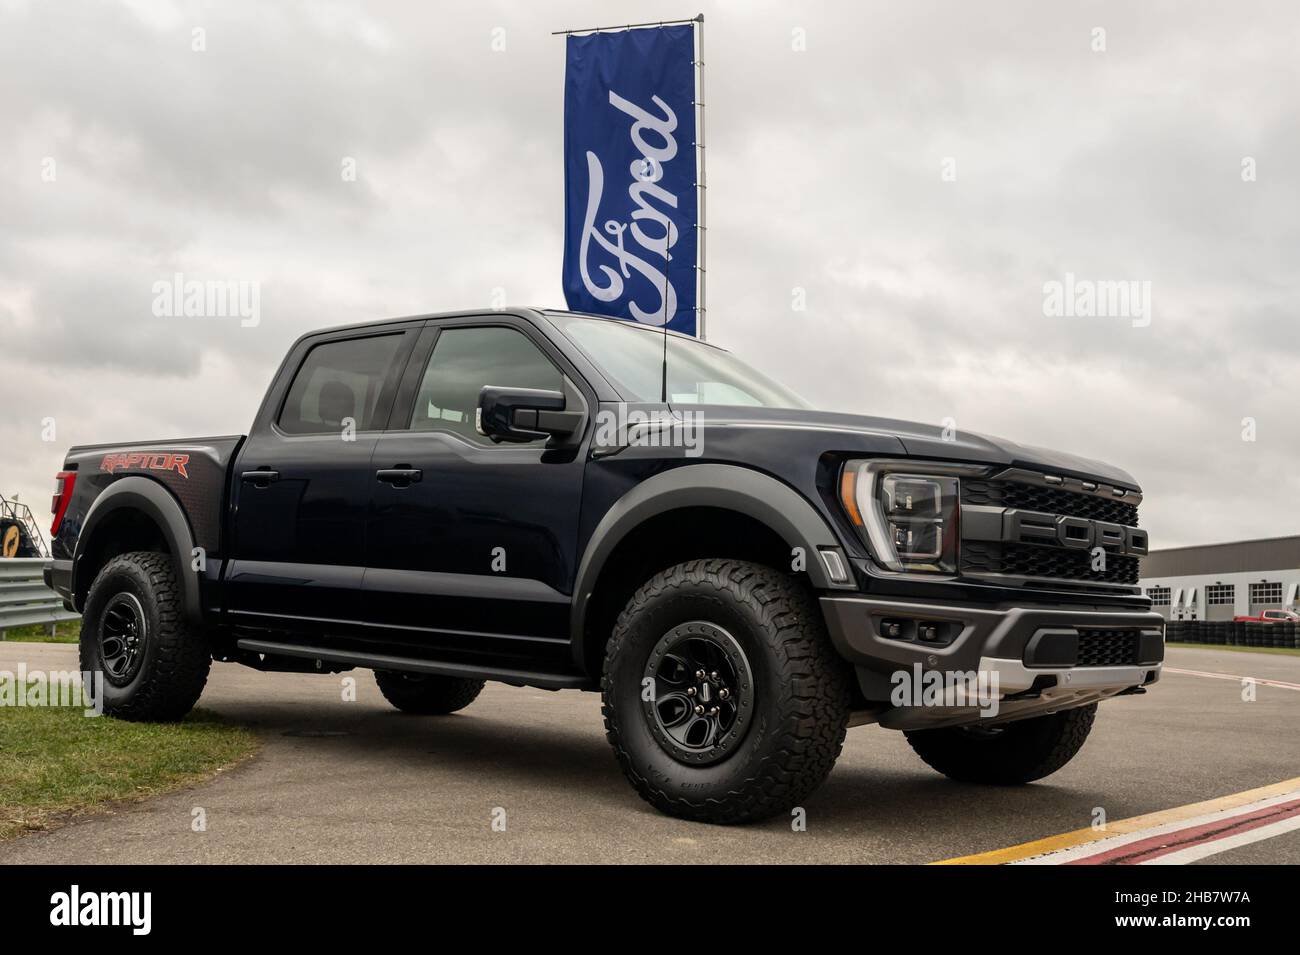 PONTIAC, MI/USA - SEPTEMBER 22, 2021: A 2021 Ford F-150 Raptor truck at Motor Bella, at the M1 Concourse, near Detroit, Michigan. Stock Photo